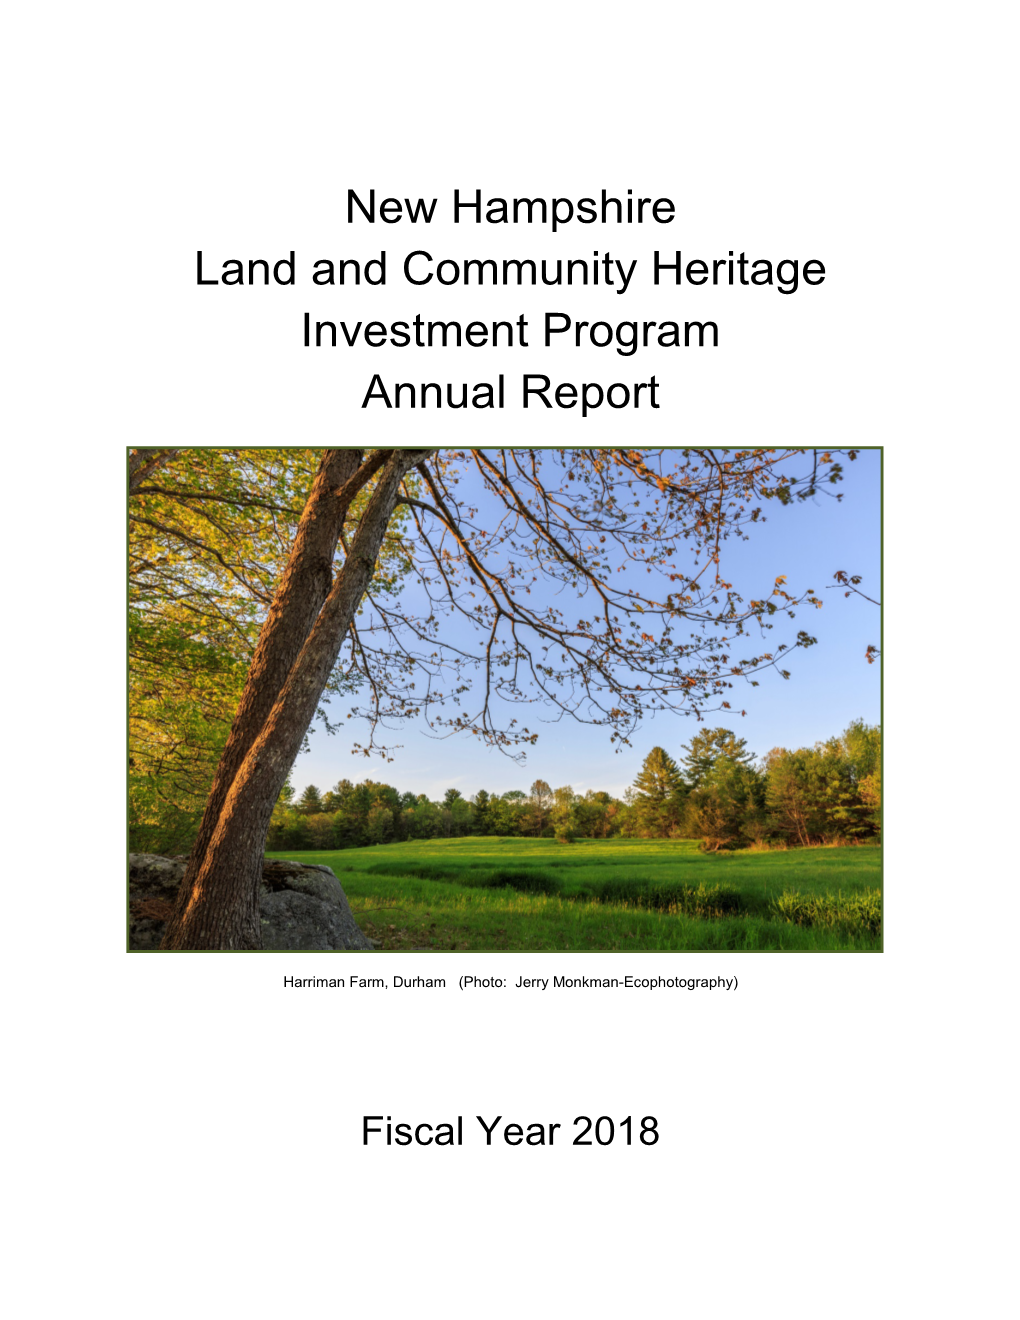 New Hampshire Land and Community Heritage Investment Program Annual Report